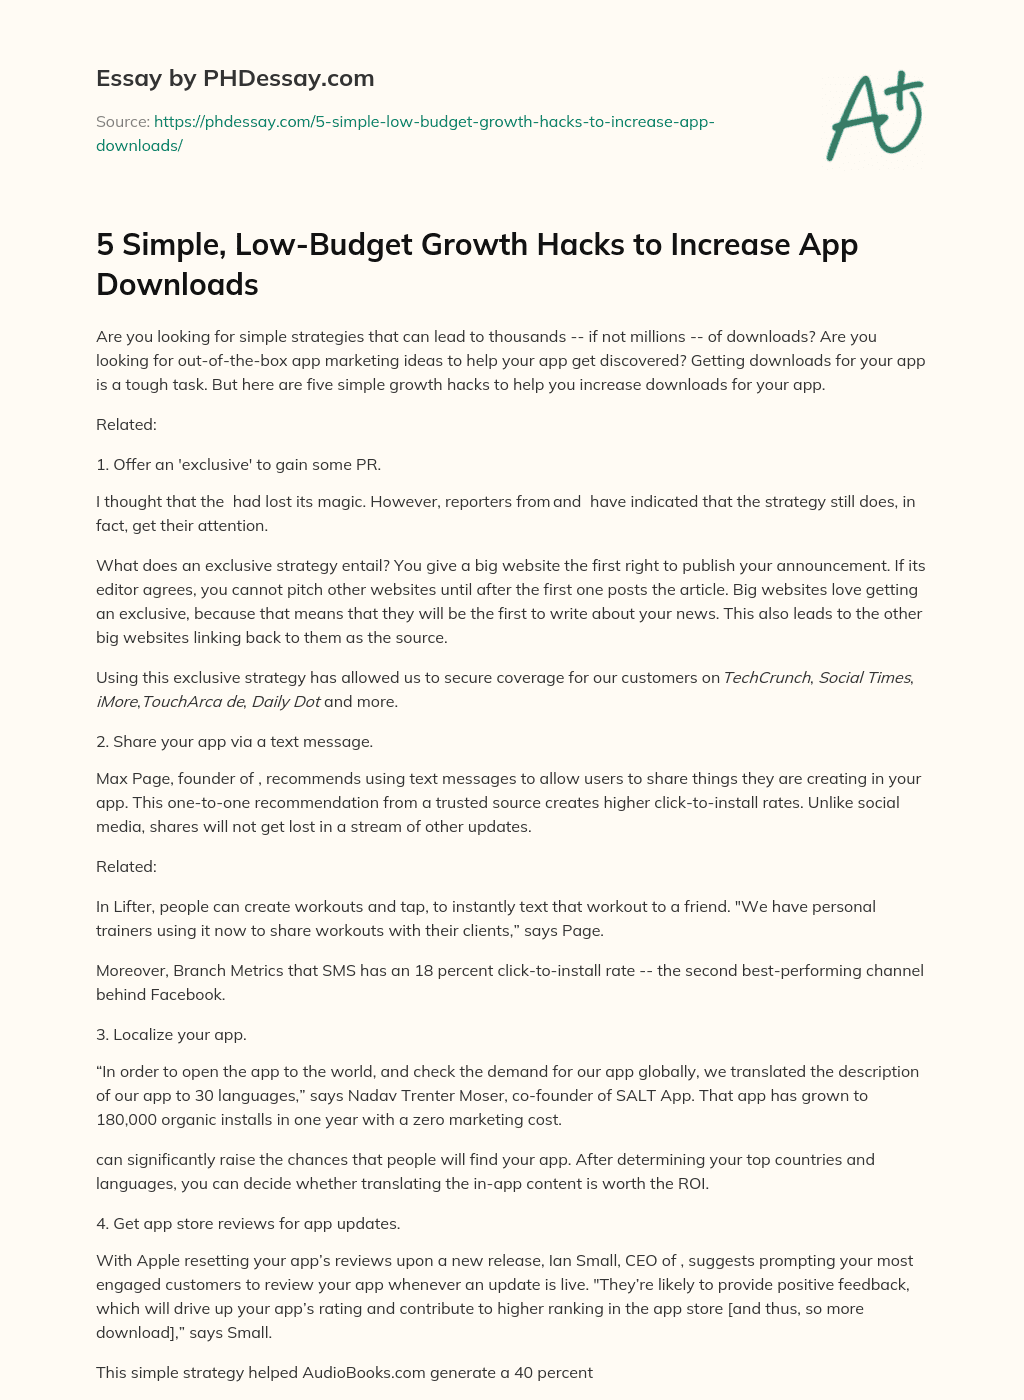 5 Simple, Low-Budget Growth Hacks to Increase App Downloads essay